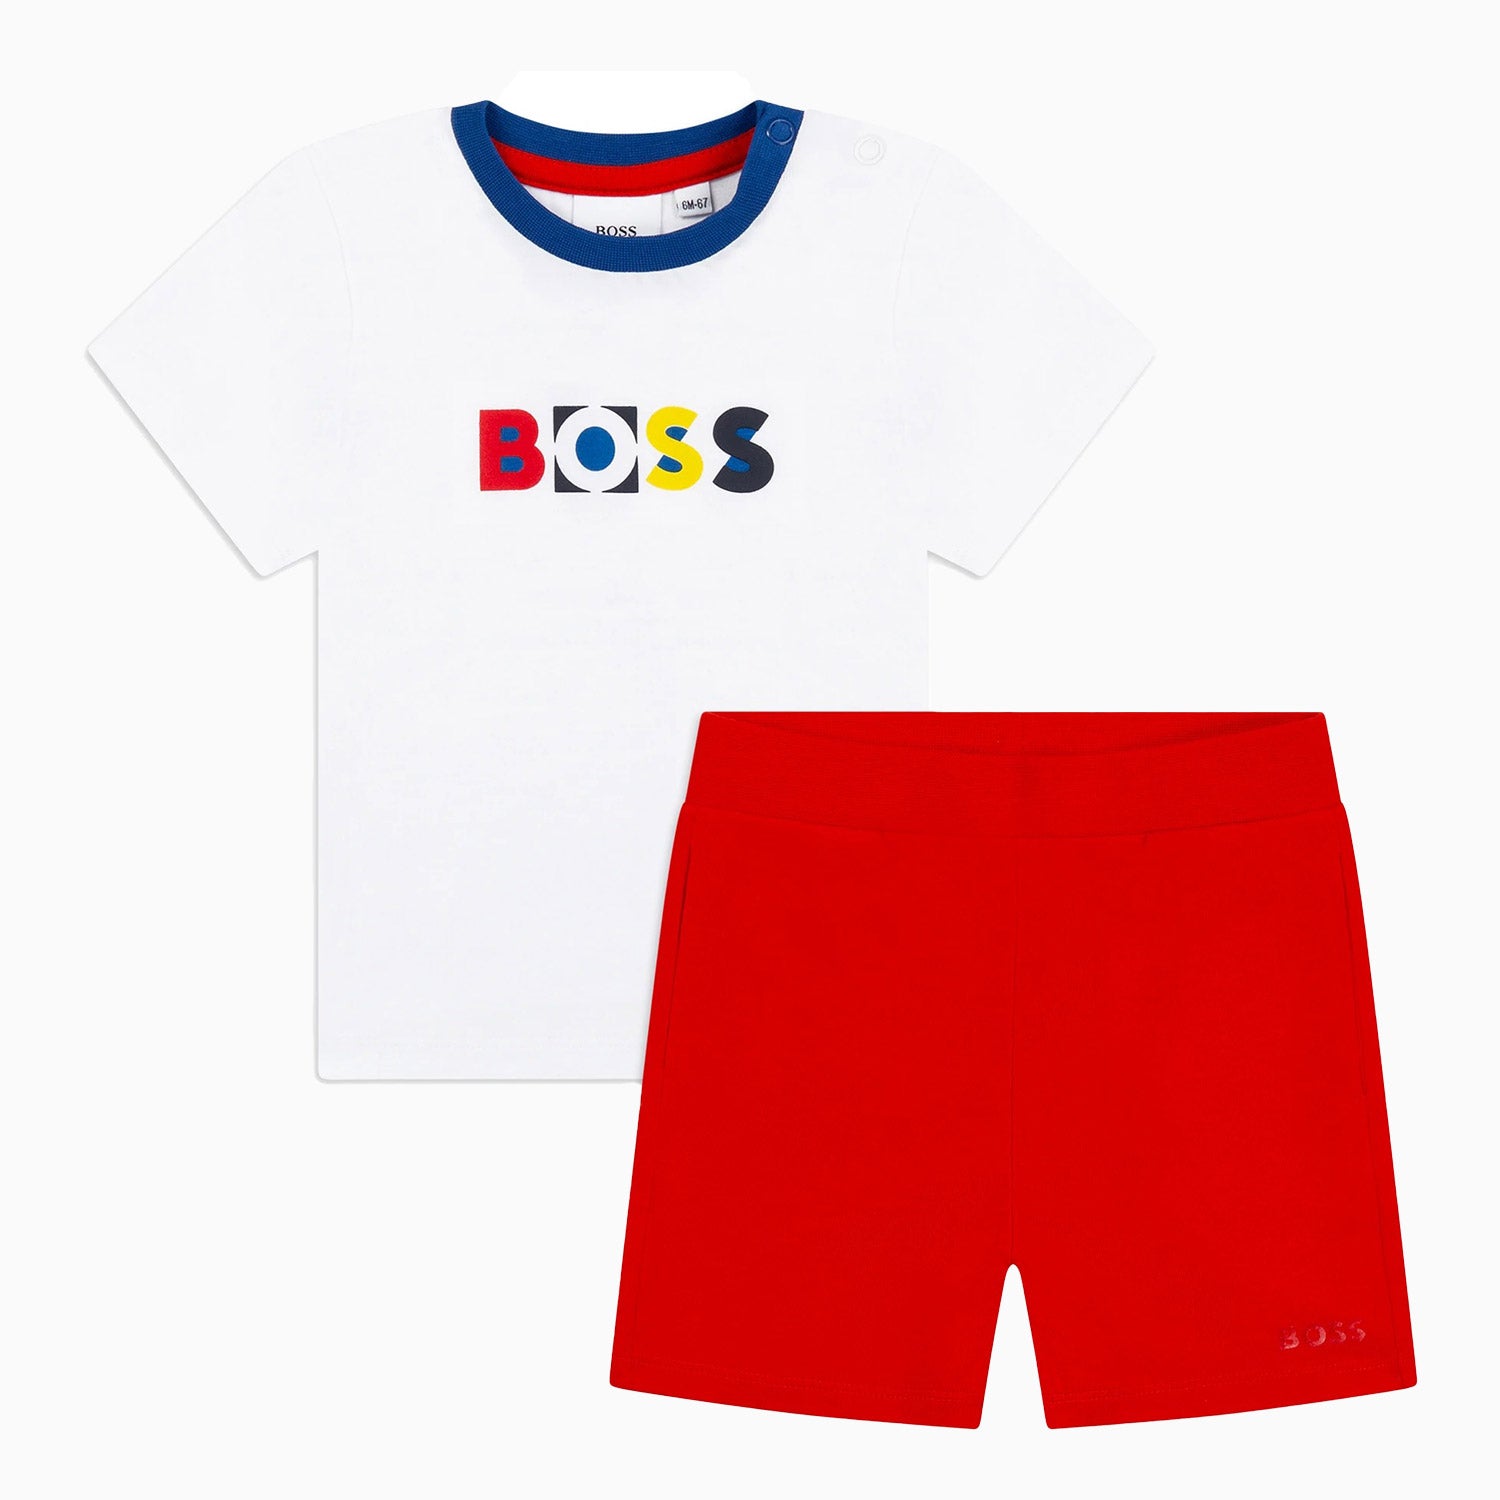 hugo-boss-kids-t-shirt-and-shorts-outfit-toddlers-j08058-871